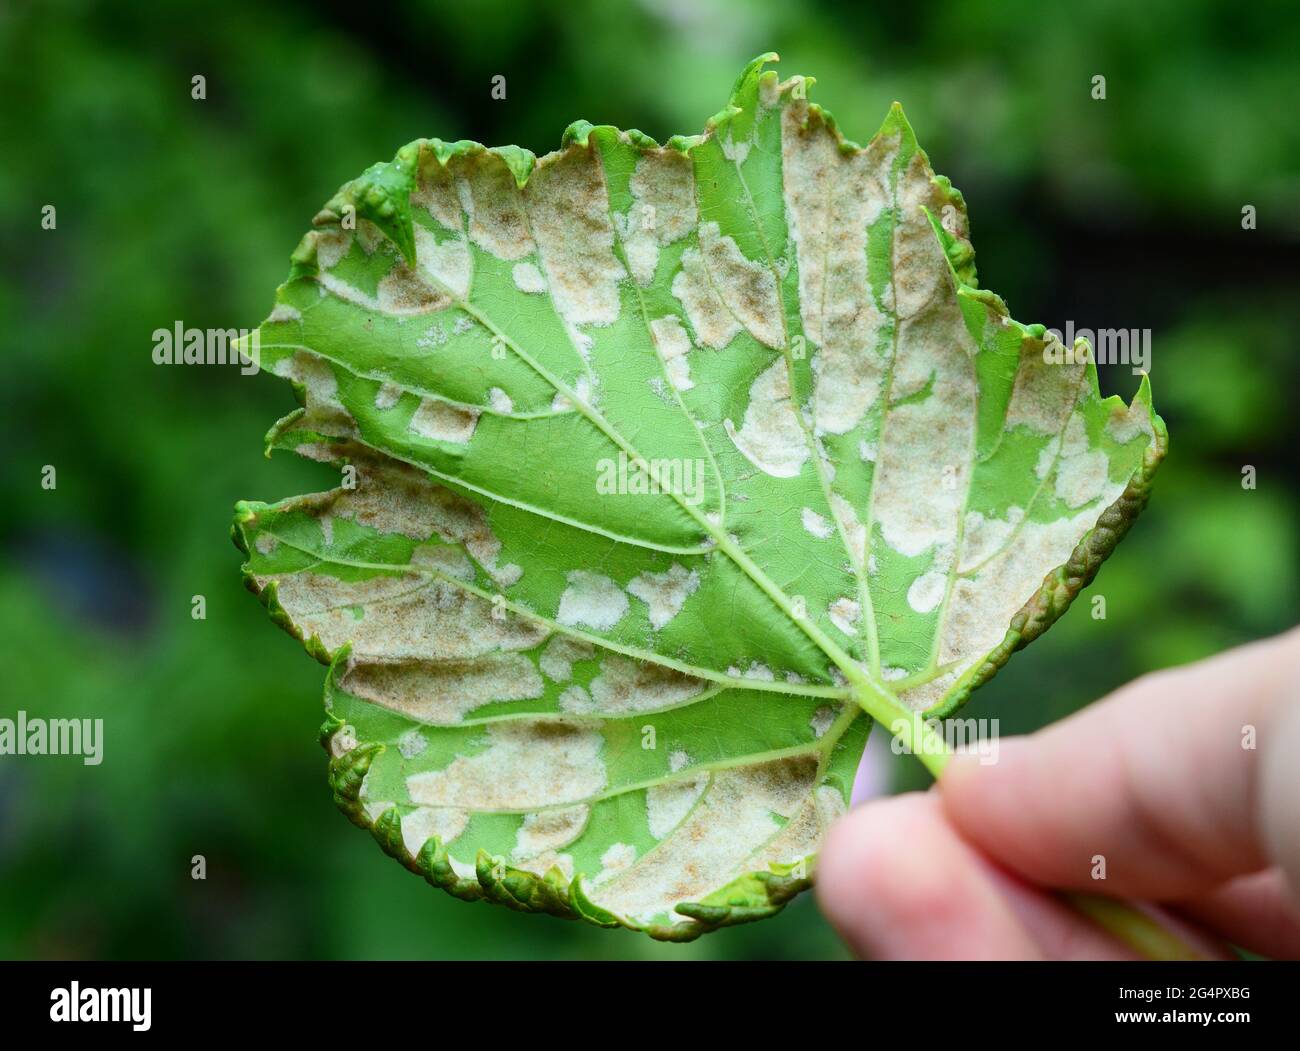 A close-up of a grapevine infected by downy mildew grapevine disease. A grape's leaf with white downy fungal on the underside of the leaf. Stock Photo